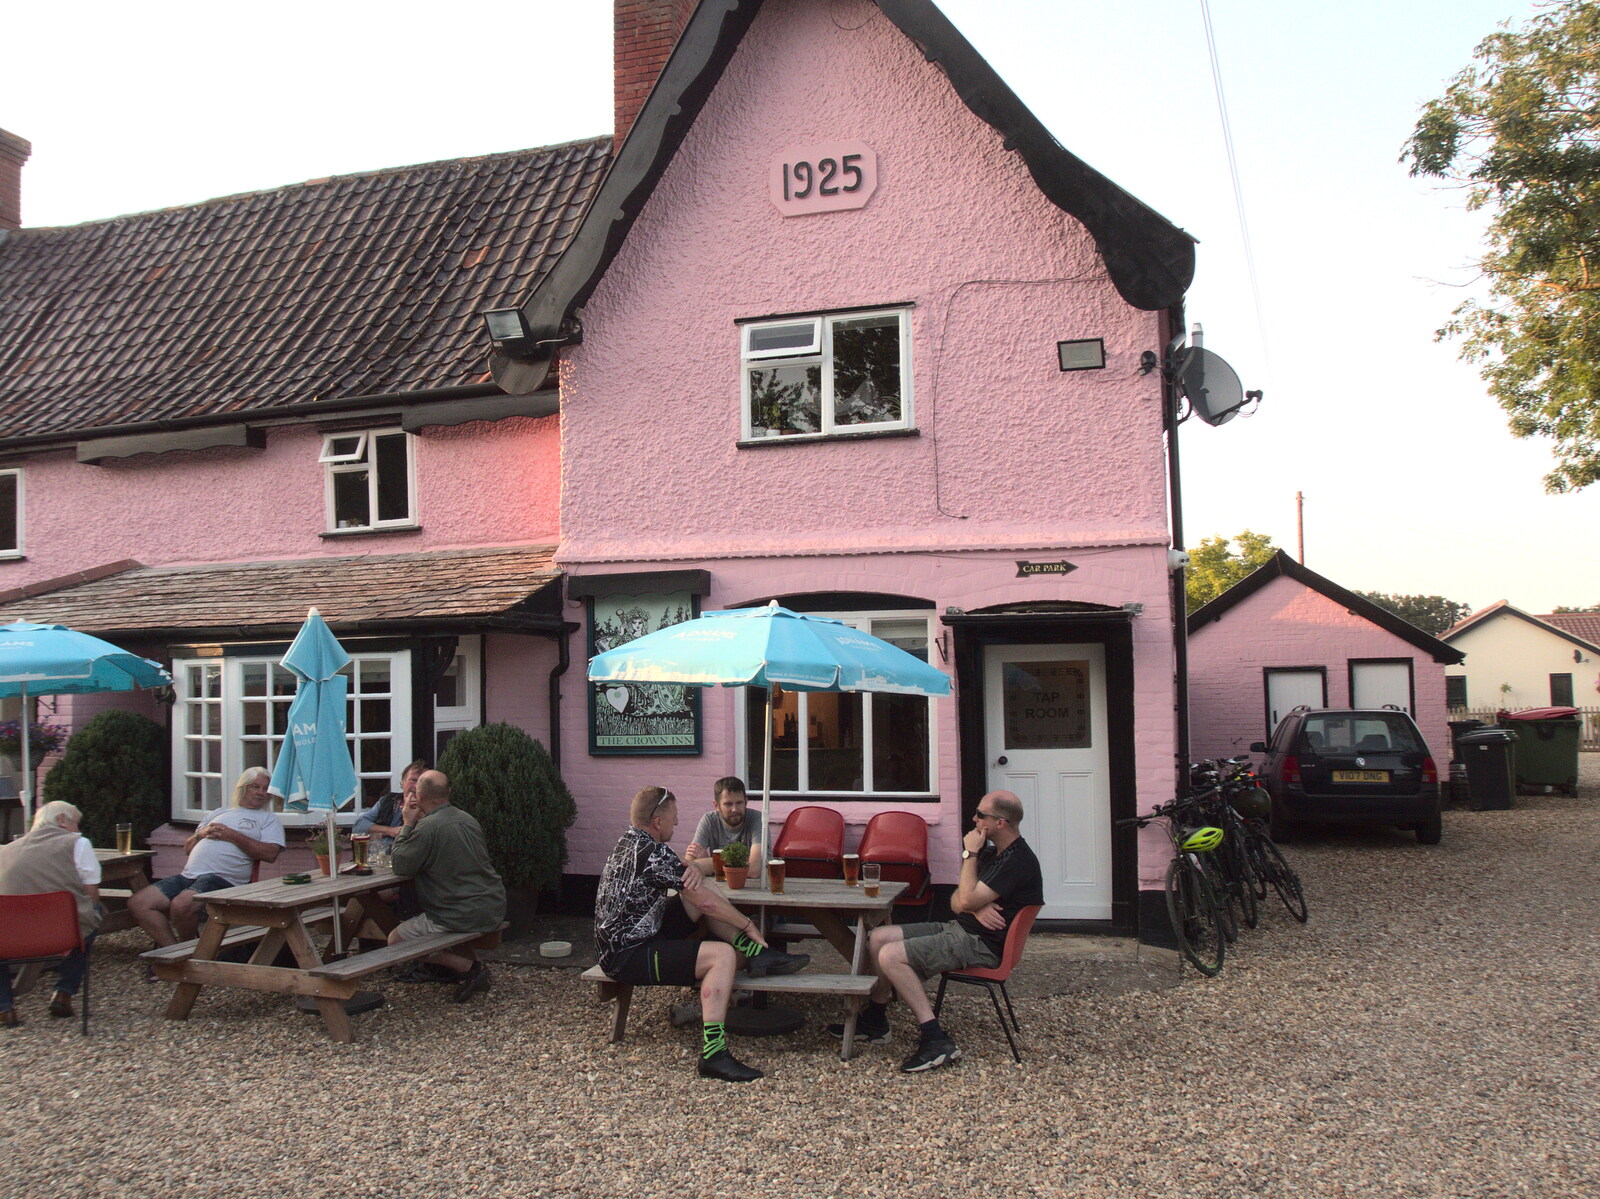 Outside the Gissing Crown from The BSCC at The Crown, Gissing, Norfolk - 22nd July 2021